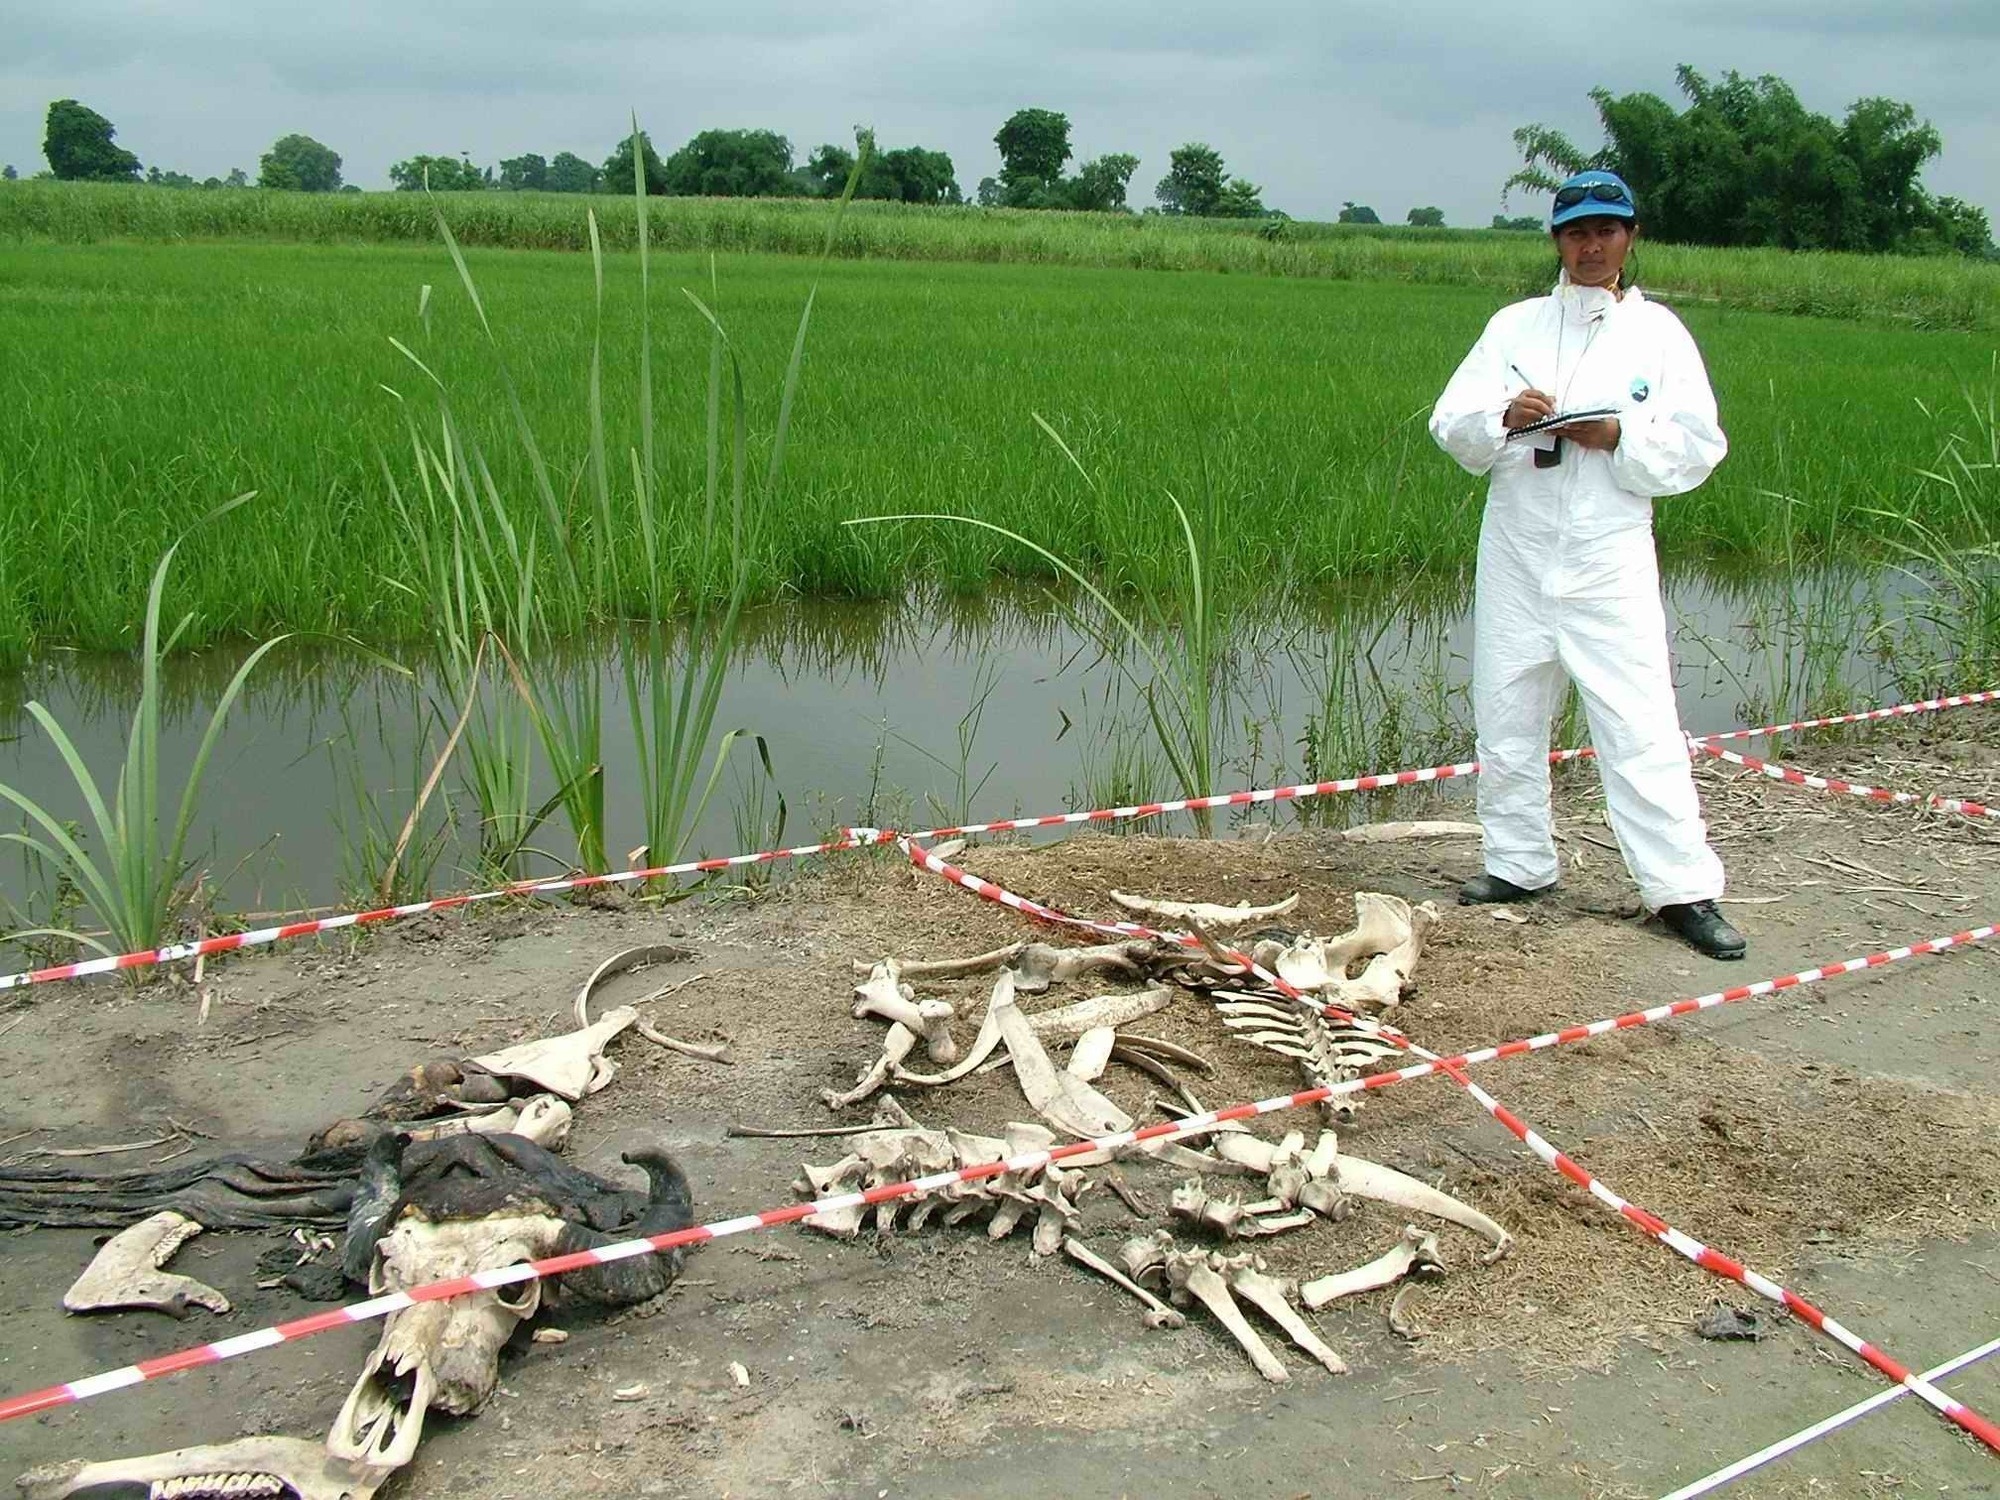 Body Farm.
The University of Tennessee Anthropological Research Facility is the original 'body farm,' a site where decomposition can be studied.